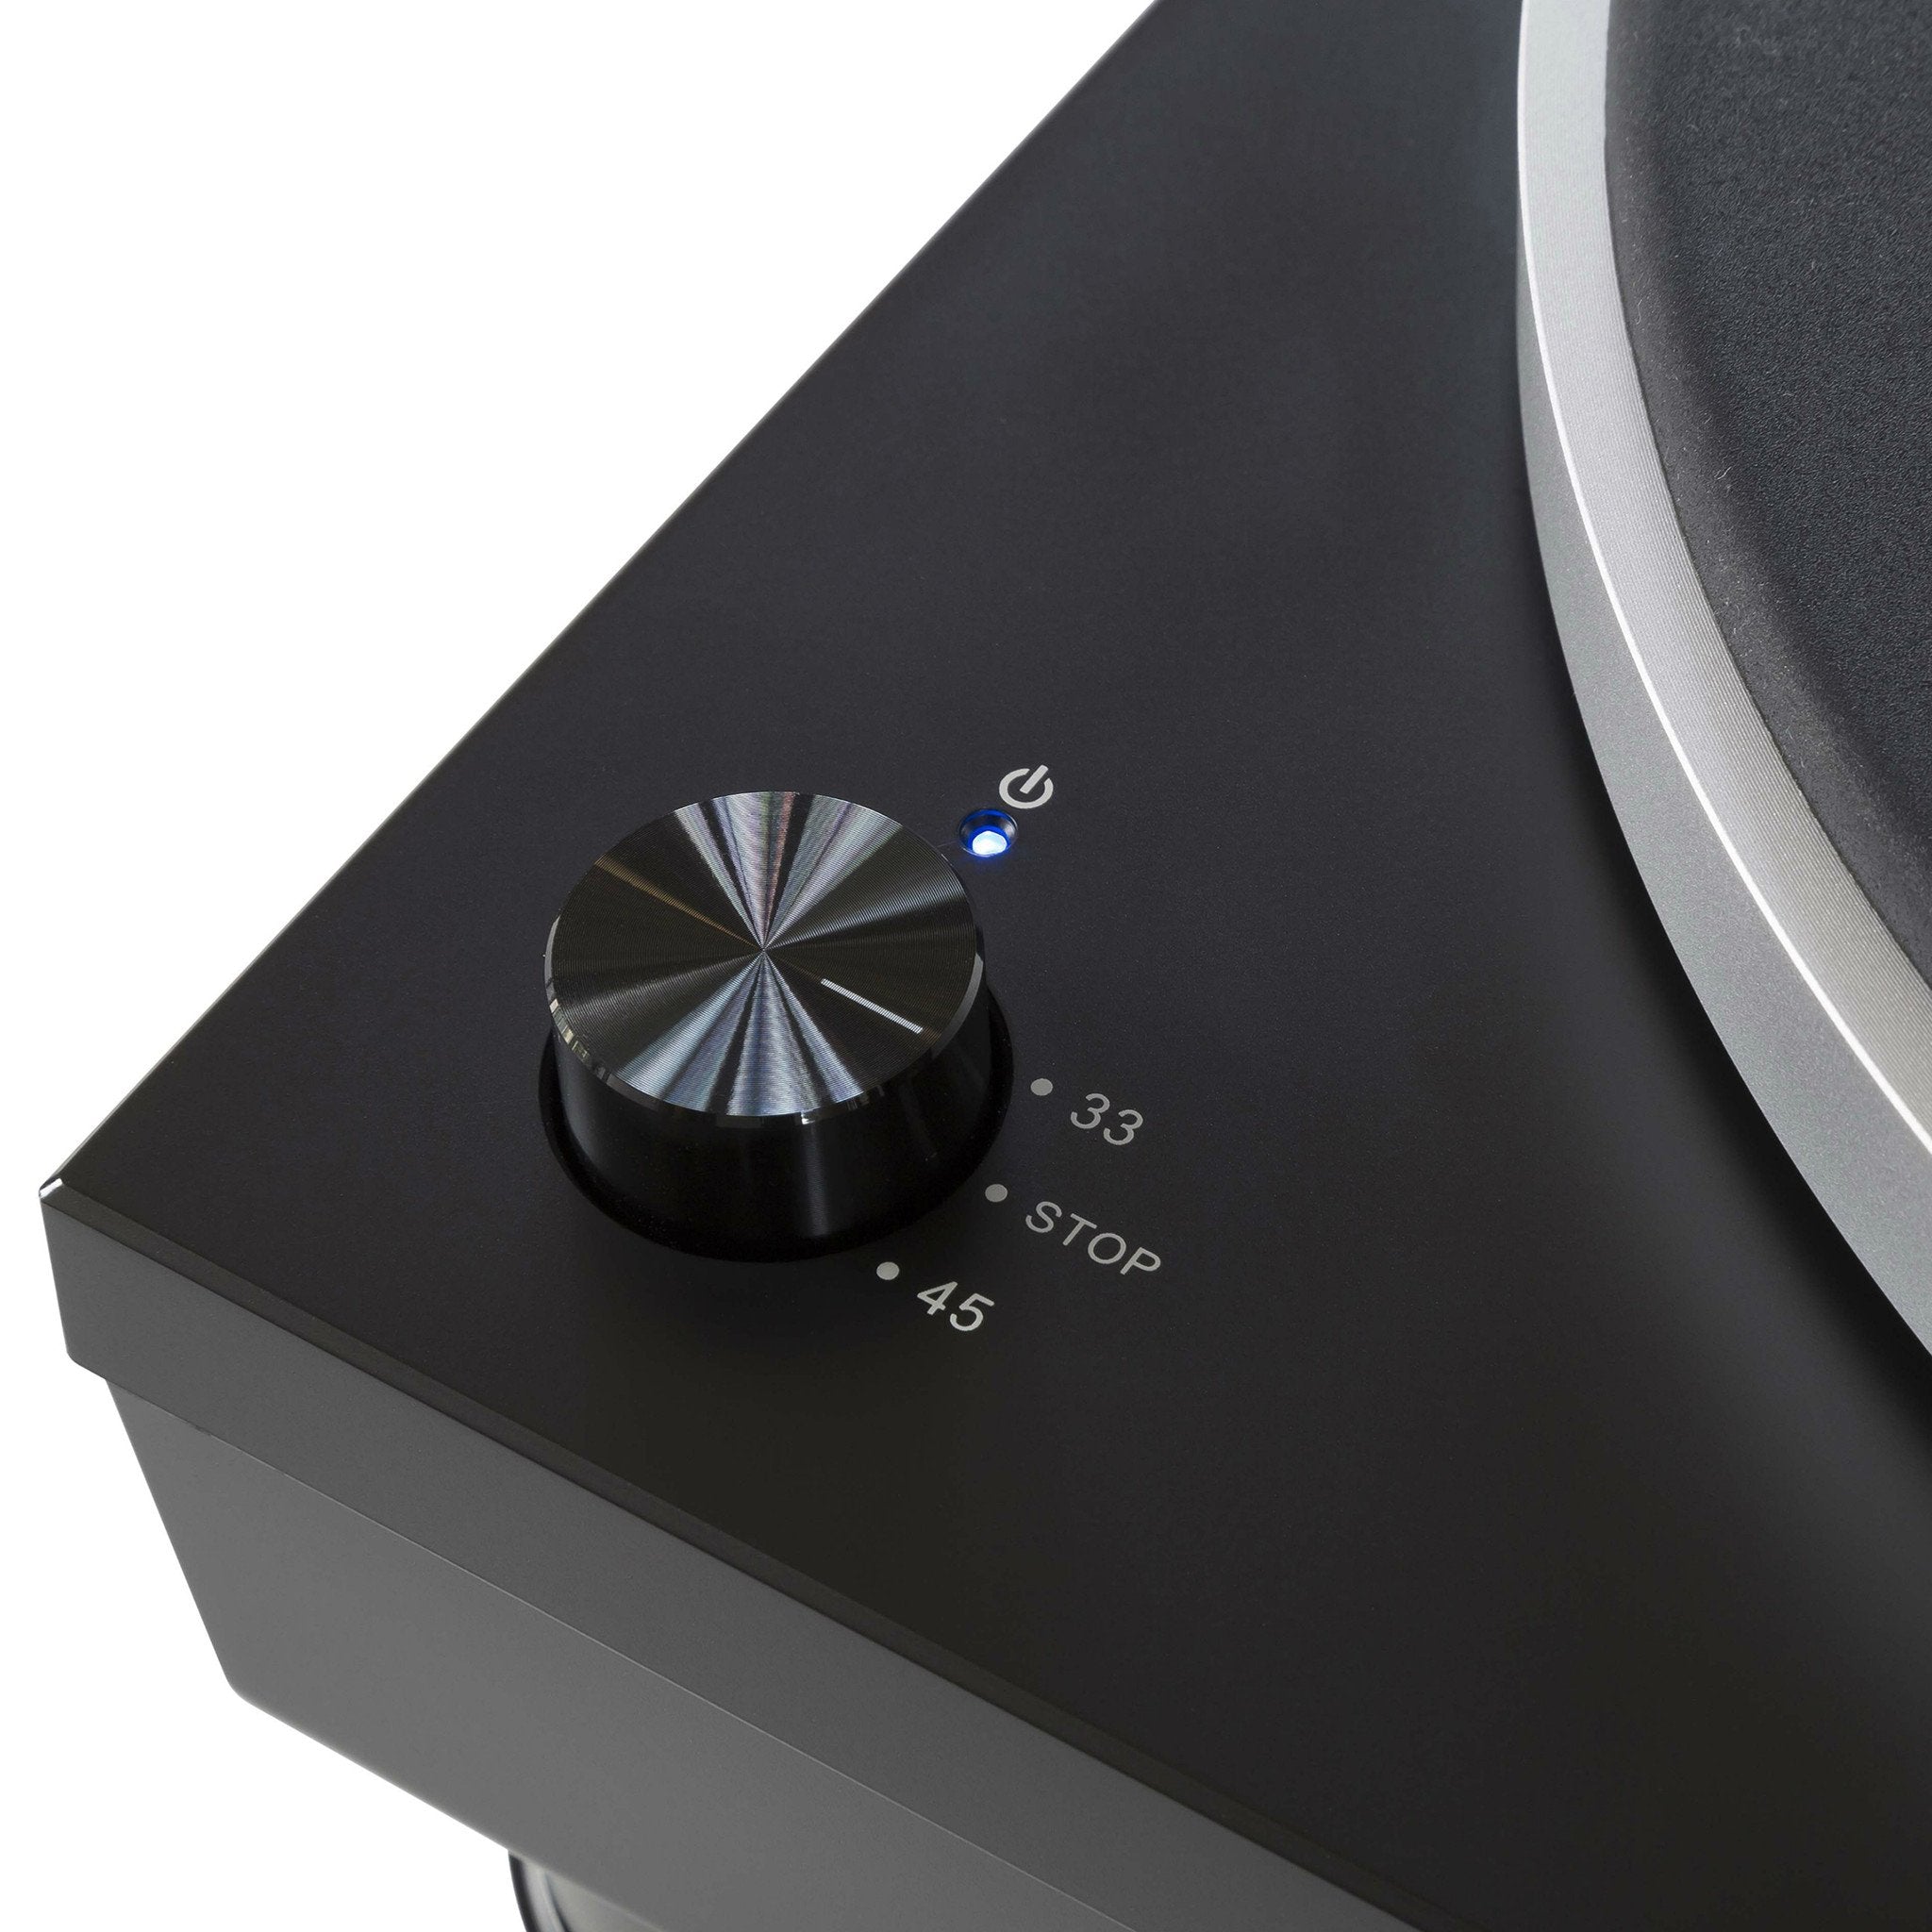 Audio-Technica: AT-LP5 Direct Drive USB Turntable